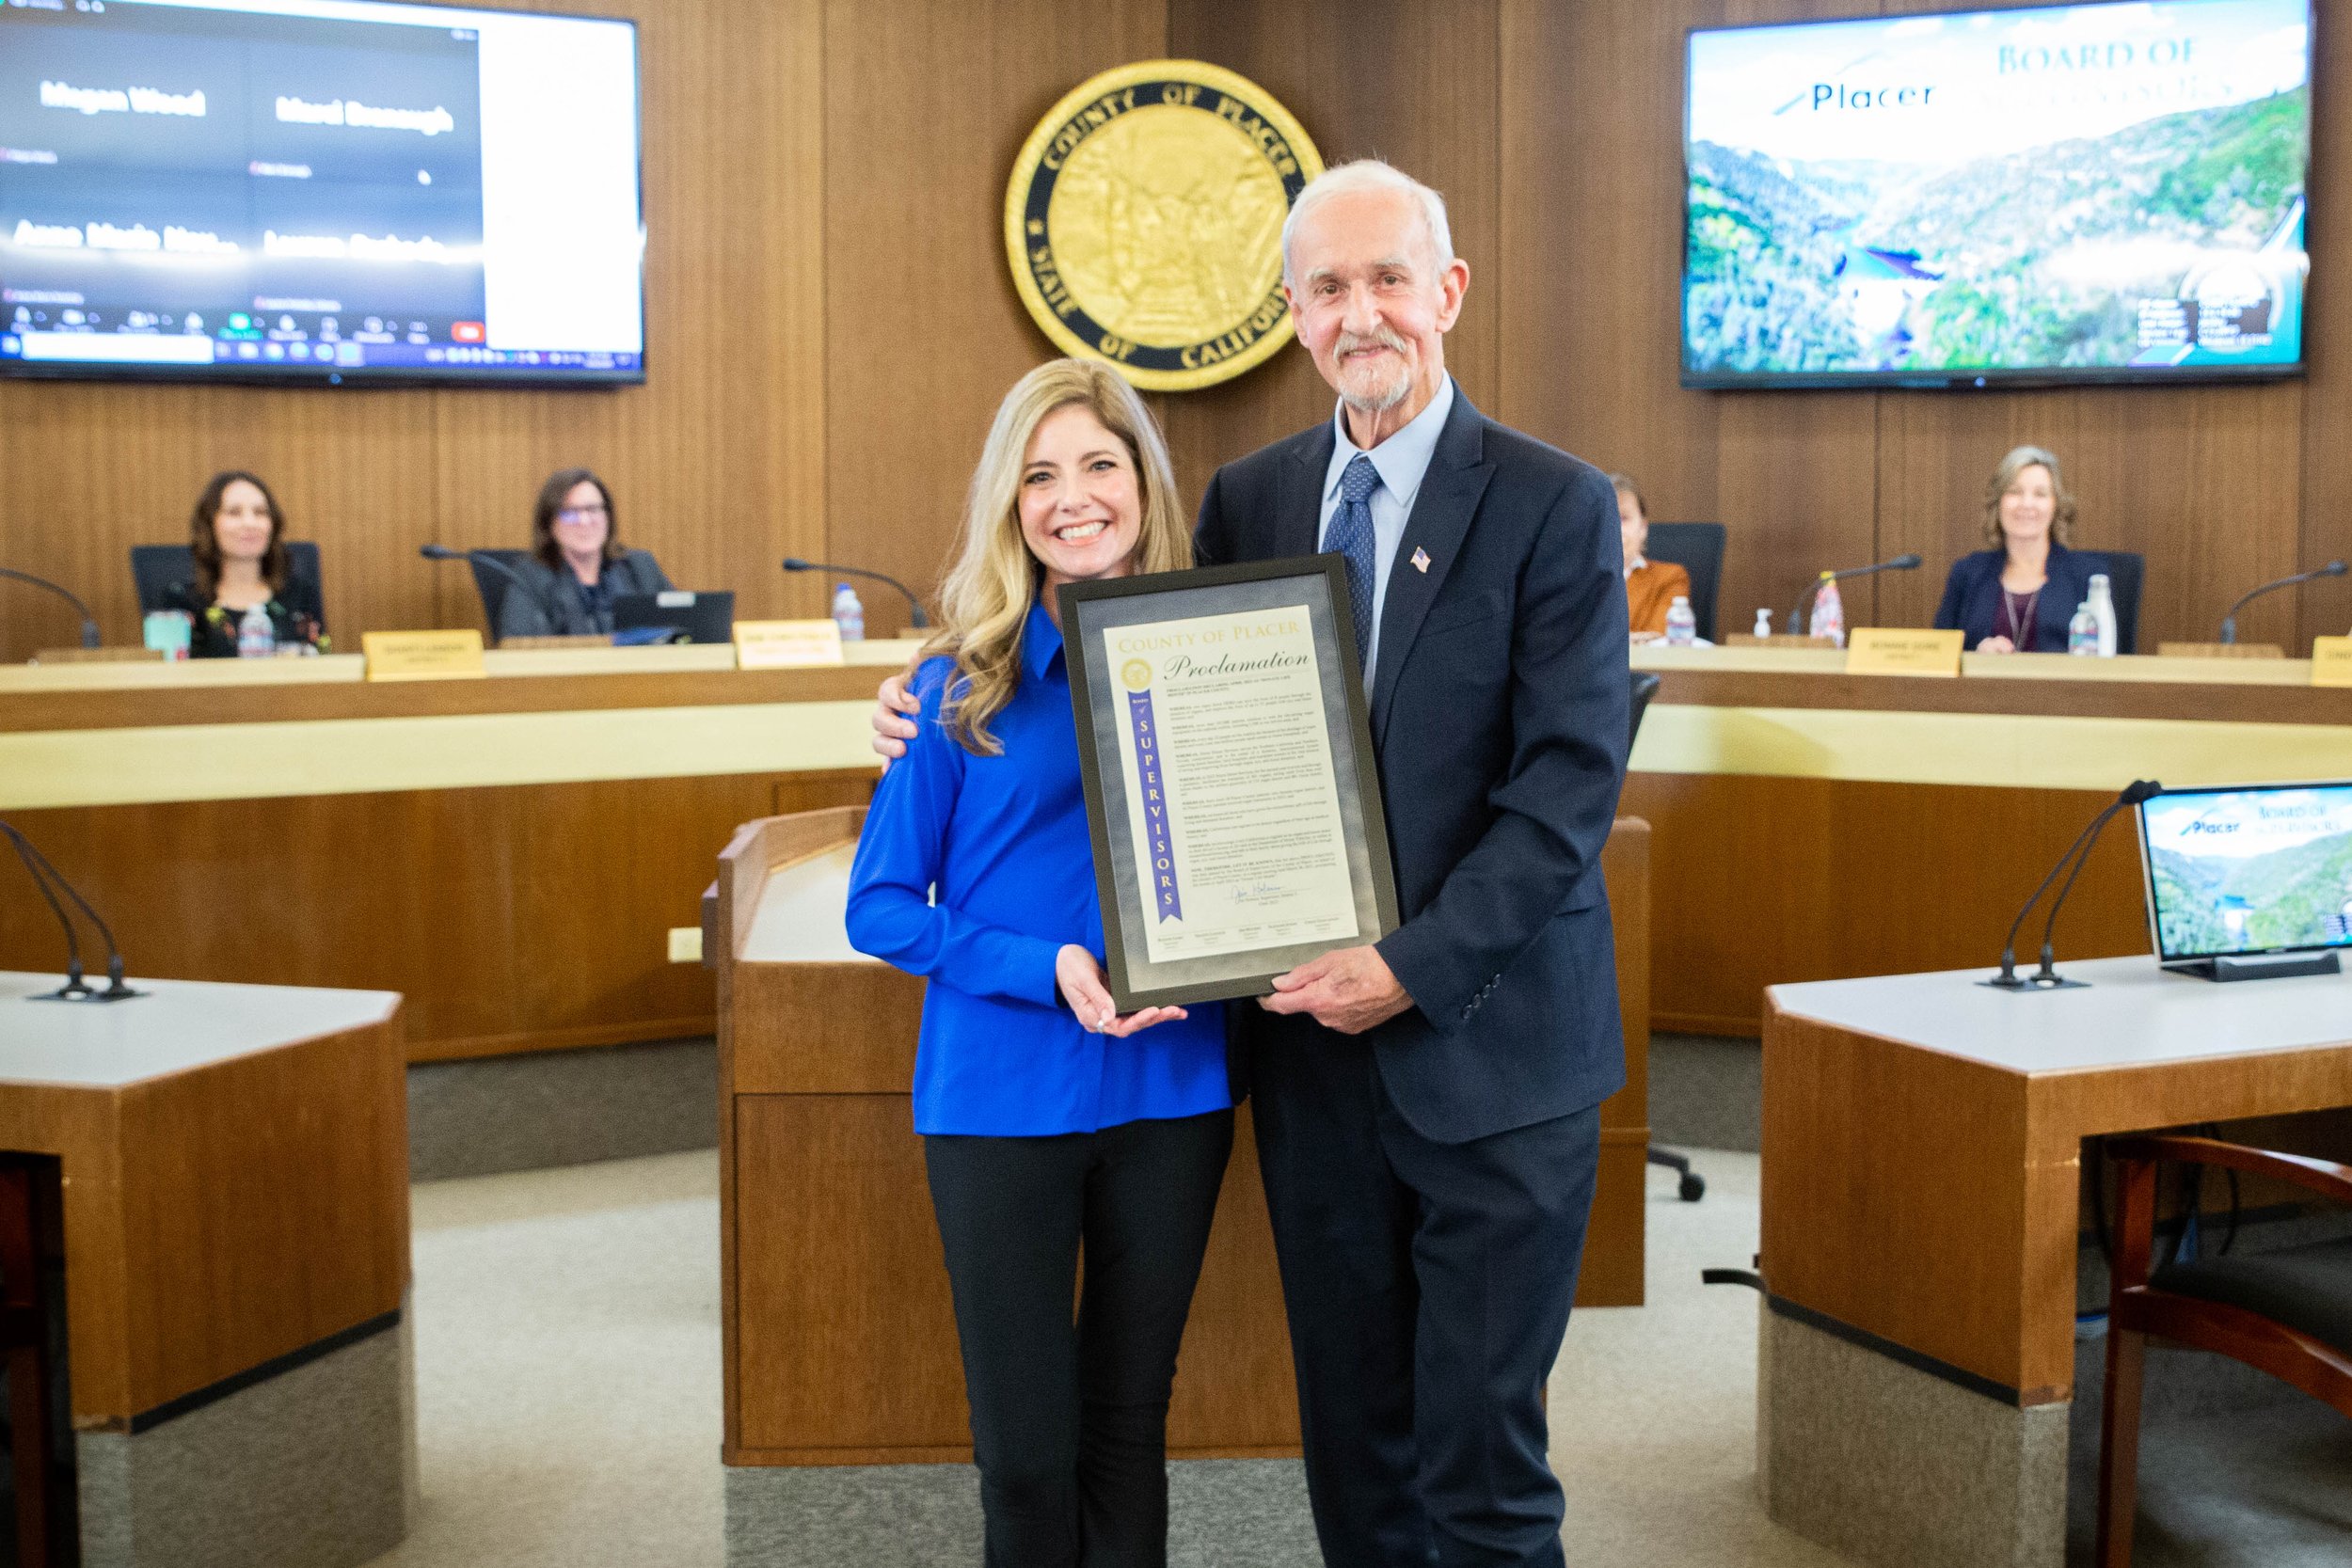 Placer County Proclamation 2.JPG